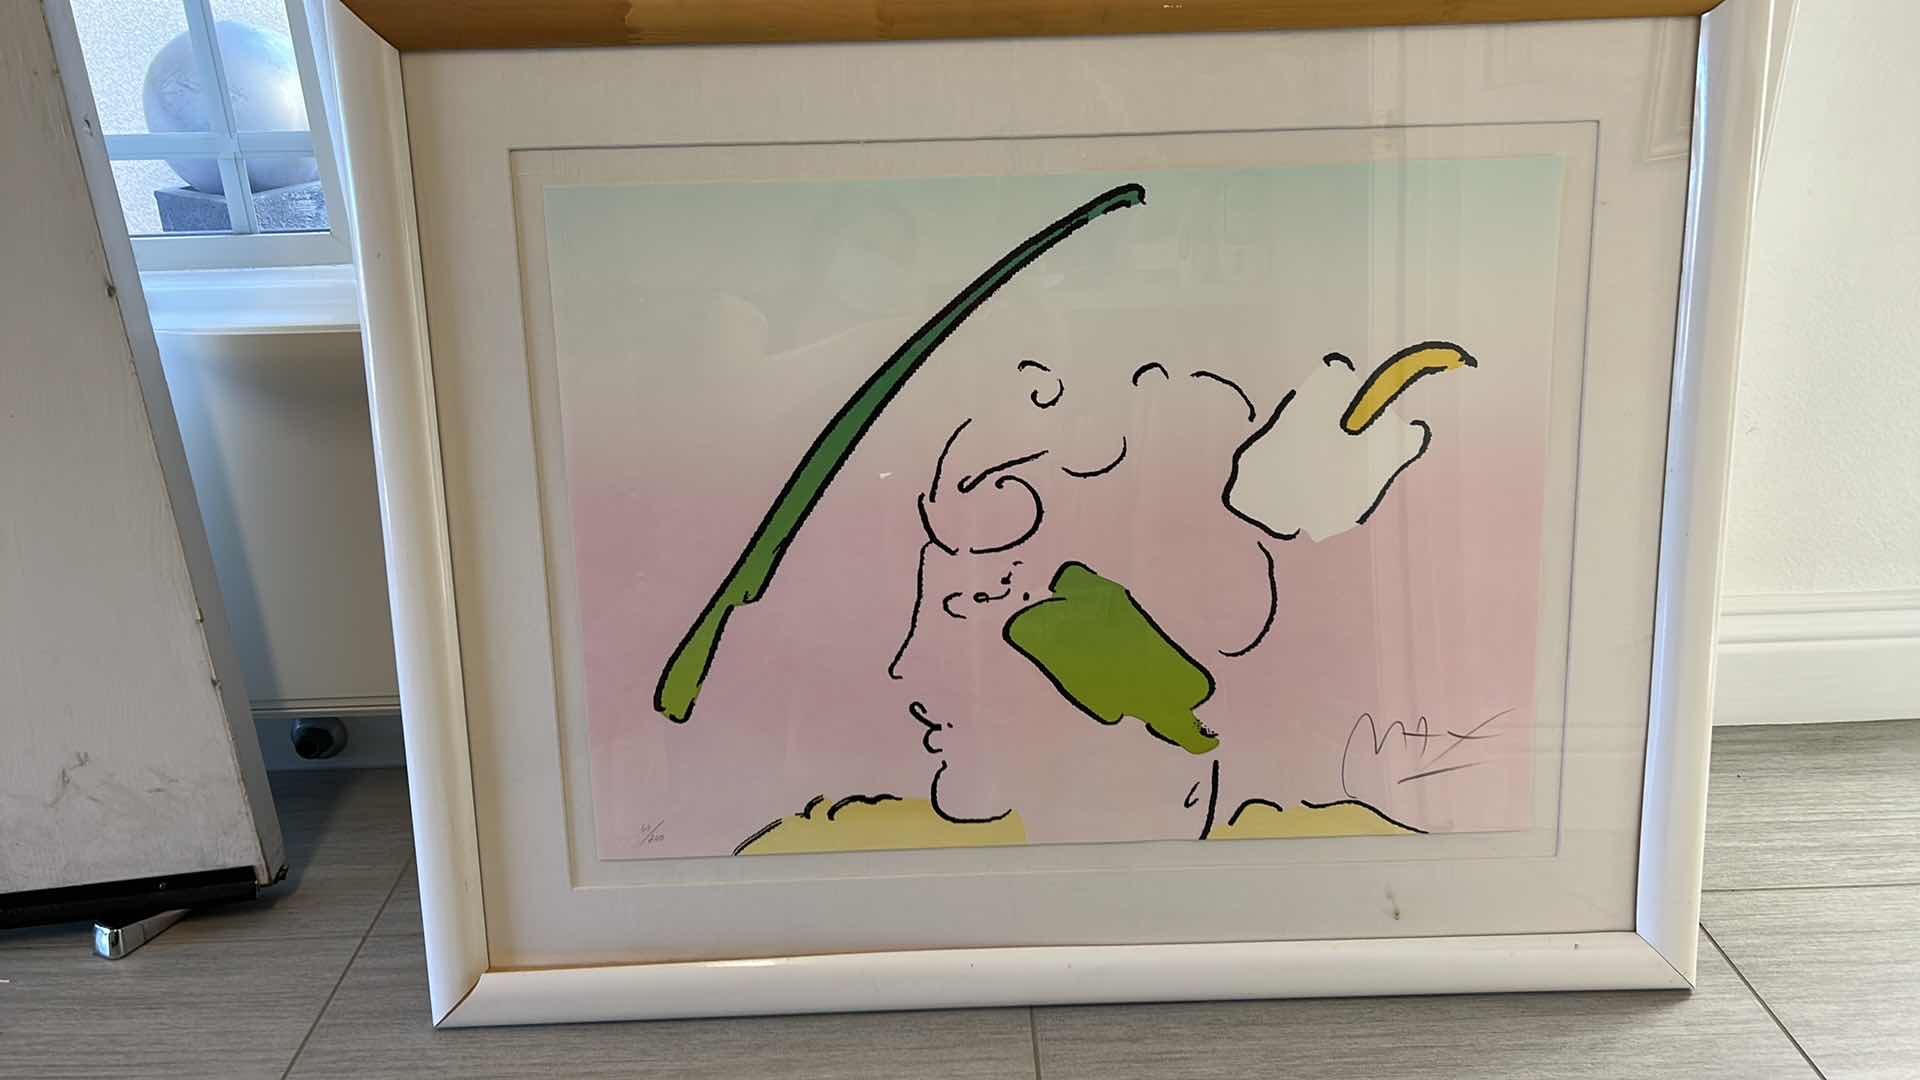 Photo 6 of ARTIST SIGNED PETER MAX LITHOGRAPH “IN HORIZON” AND NUMBERED 60/200 ARTWORK 41” x 32 1/2”